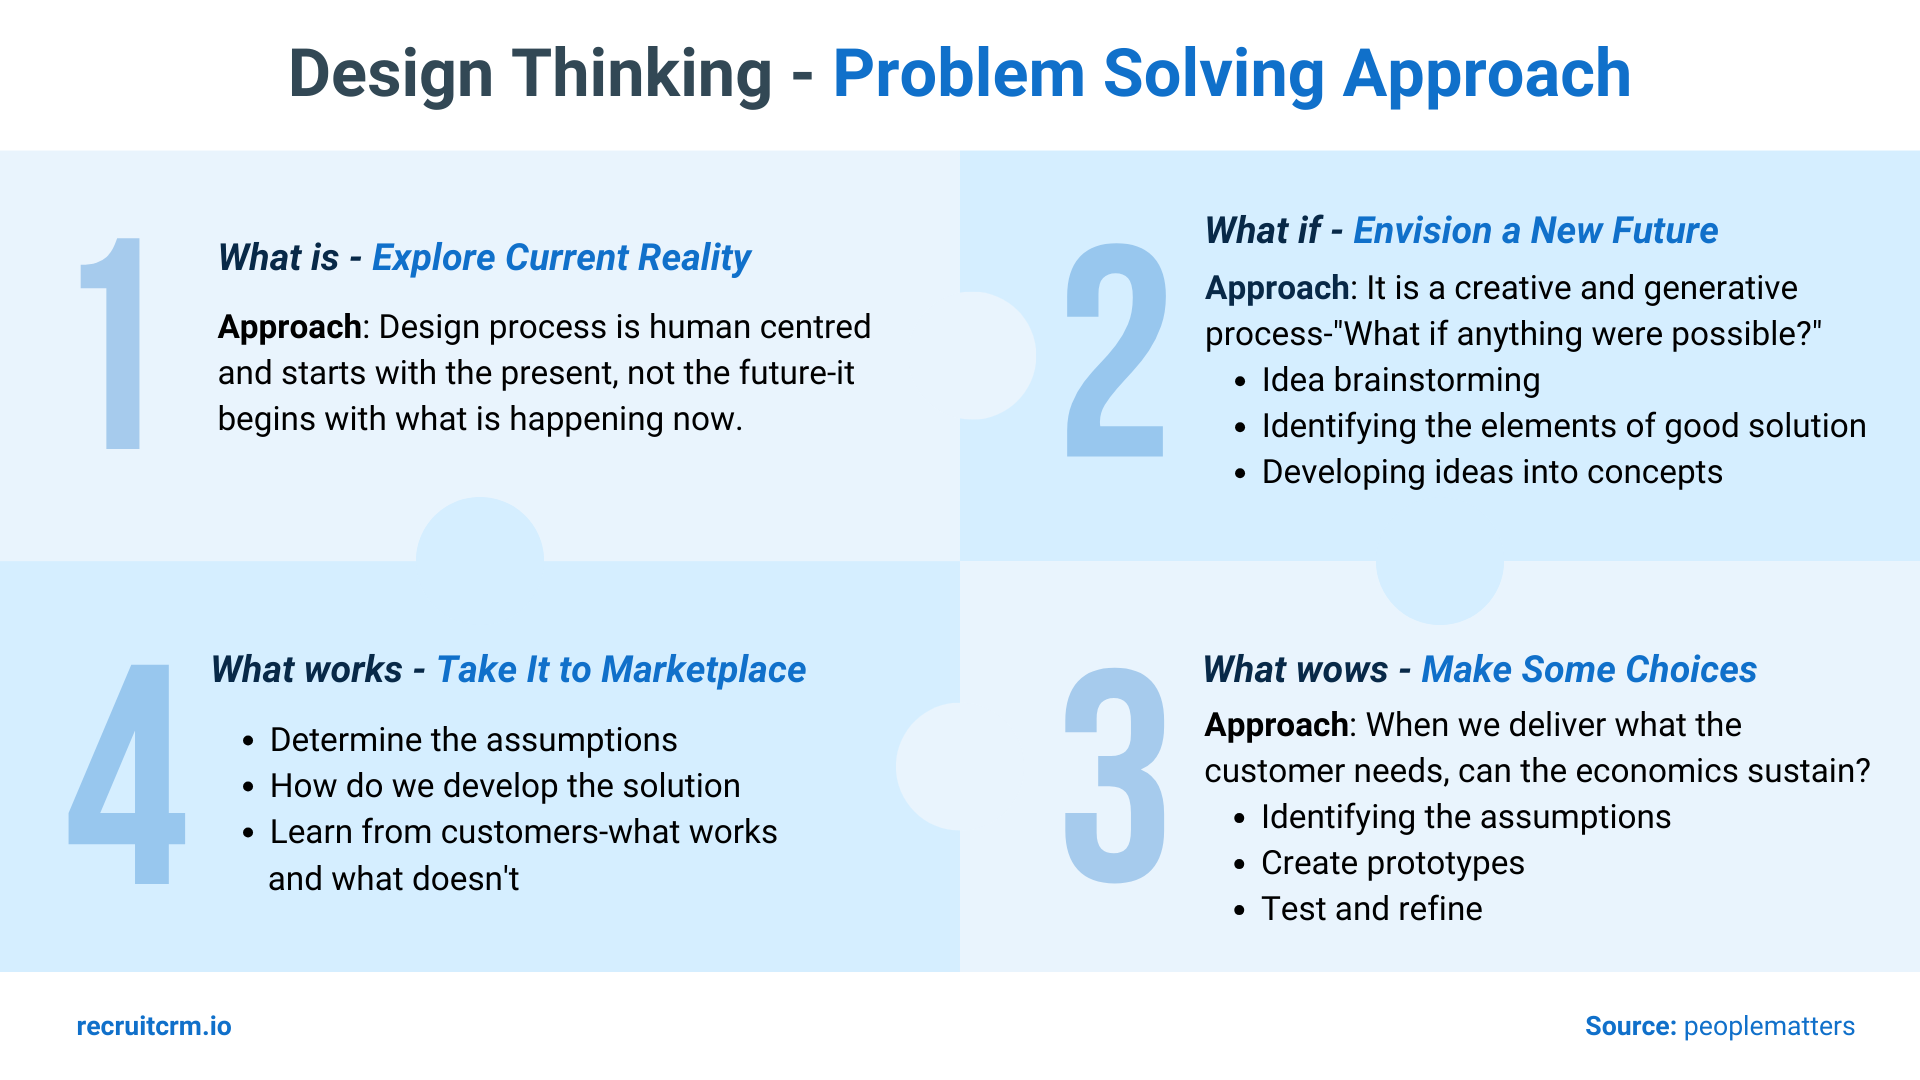 Design thinking- problem solving approach